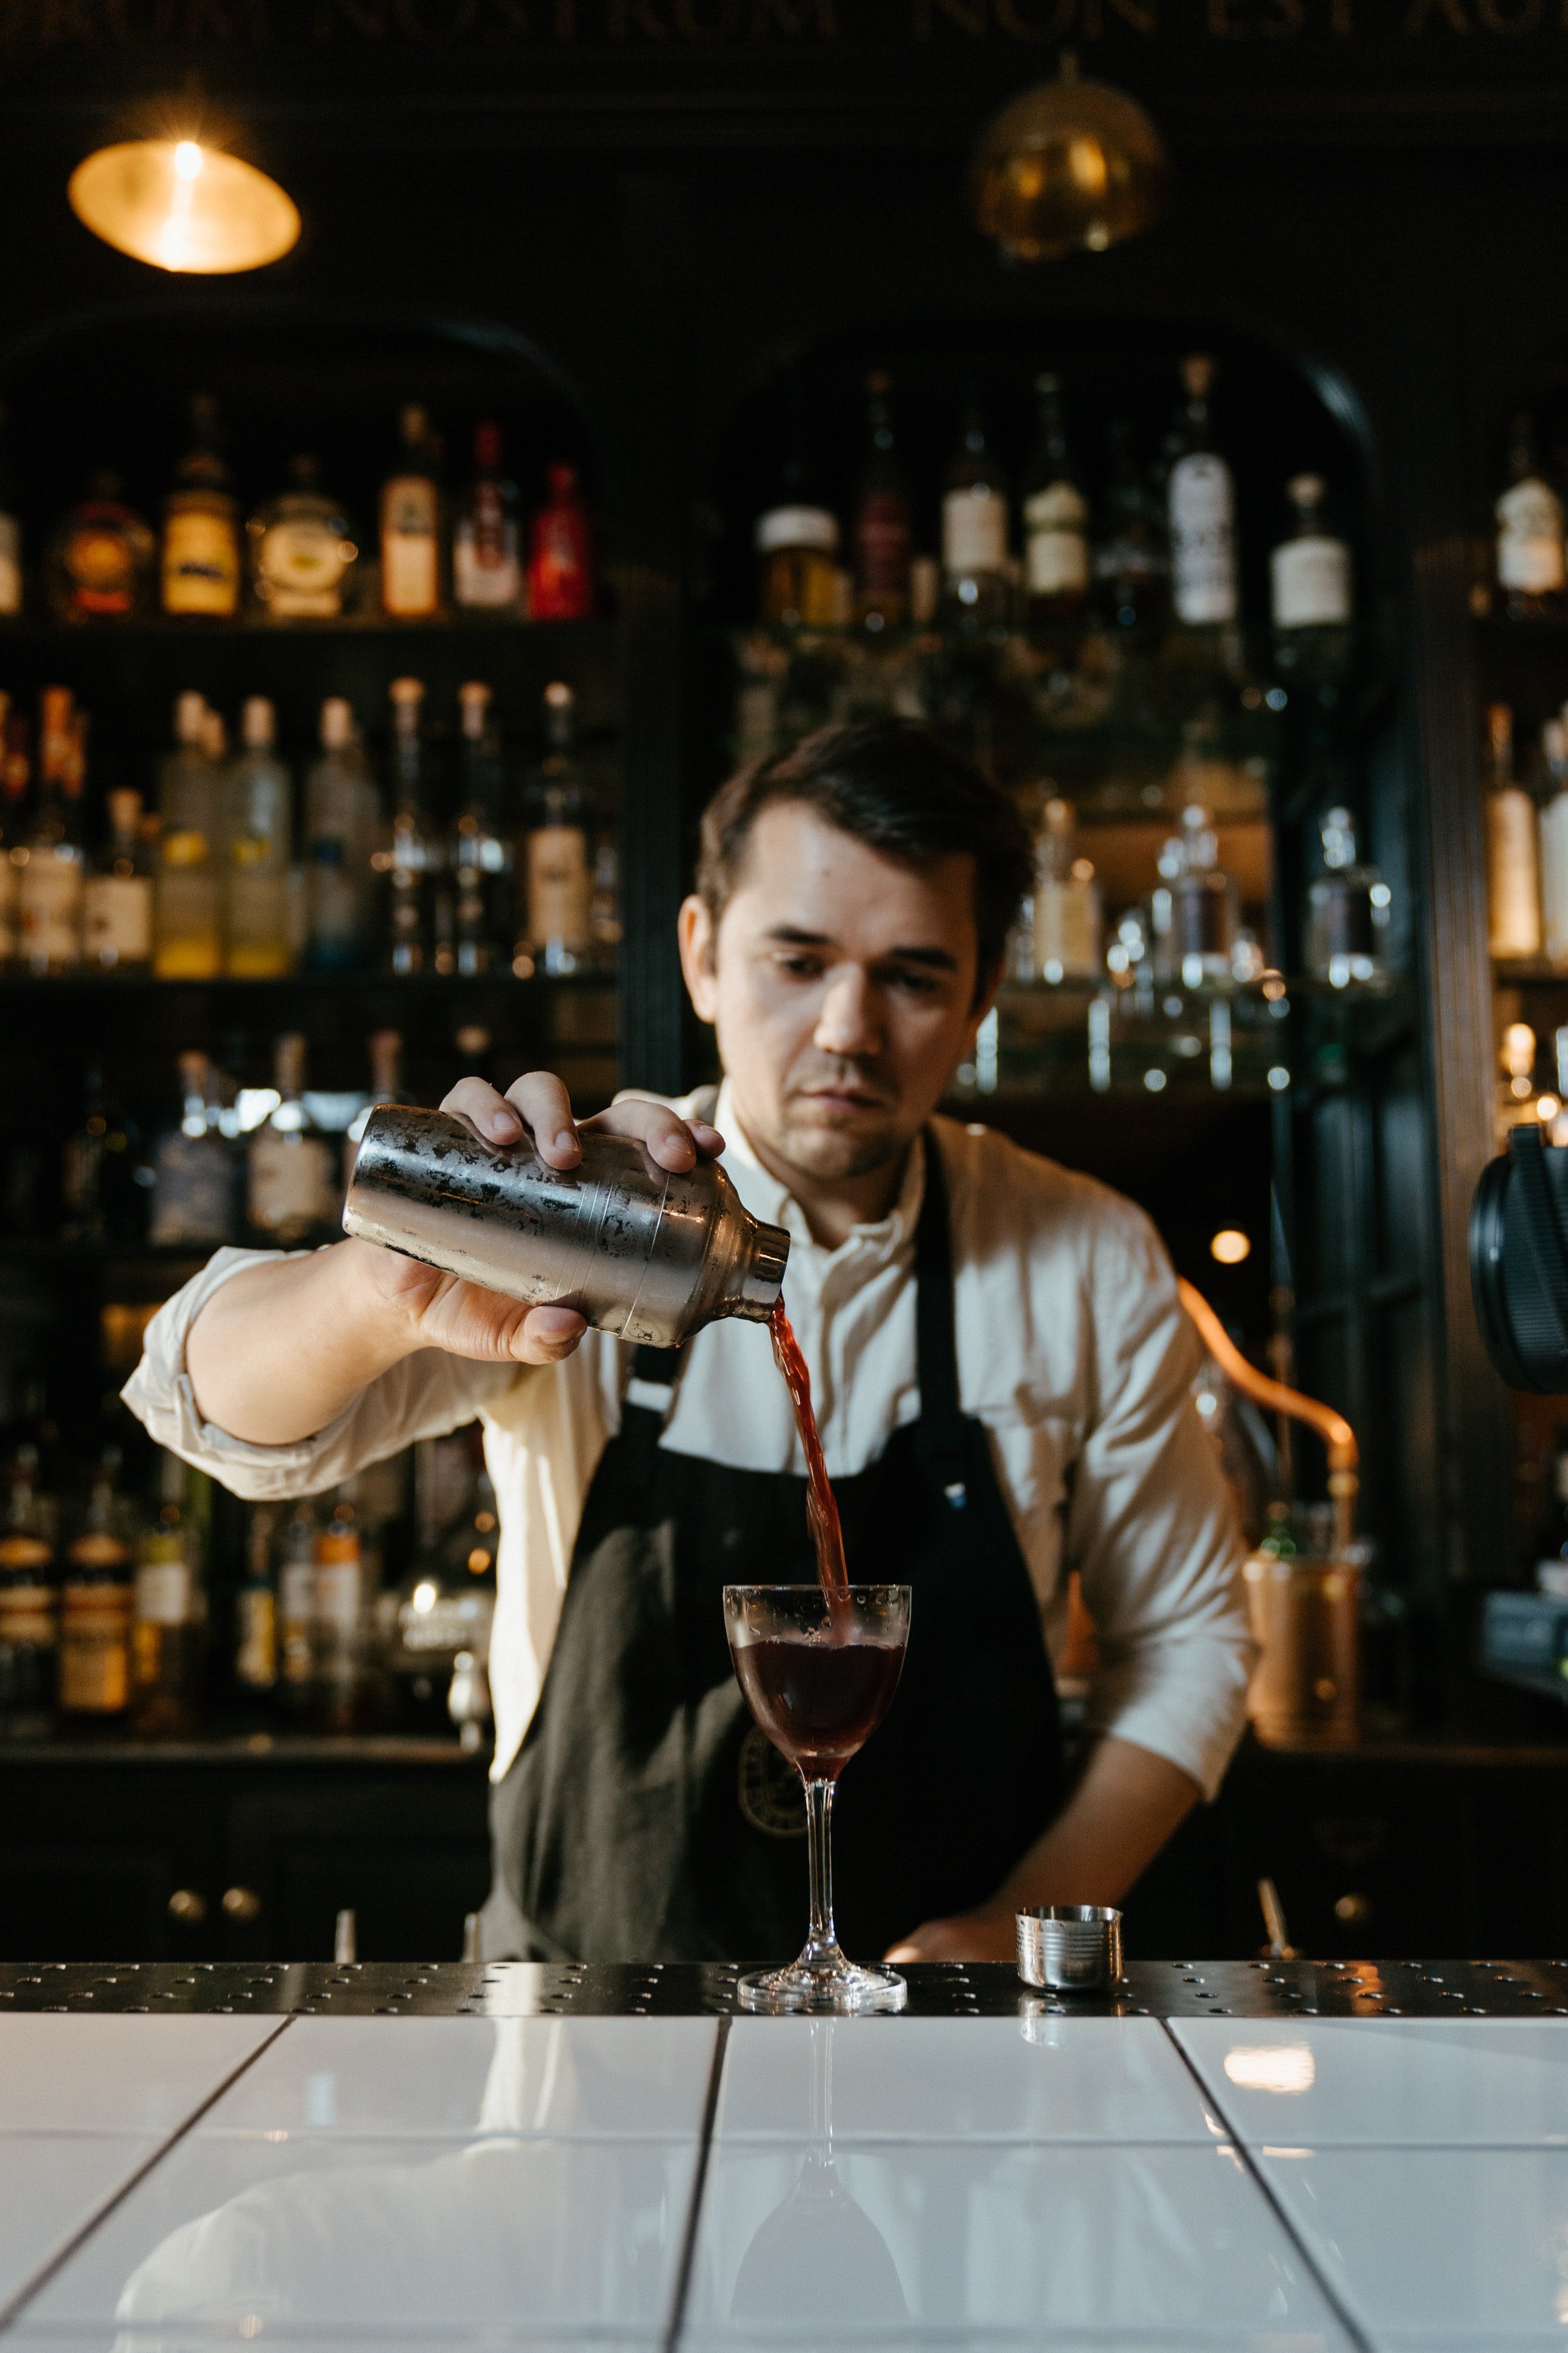 Bartender pouring drinks from behind the bar. | Photo: Pexels/ Cottonbro